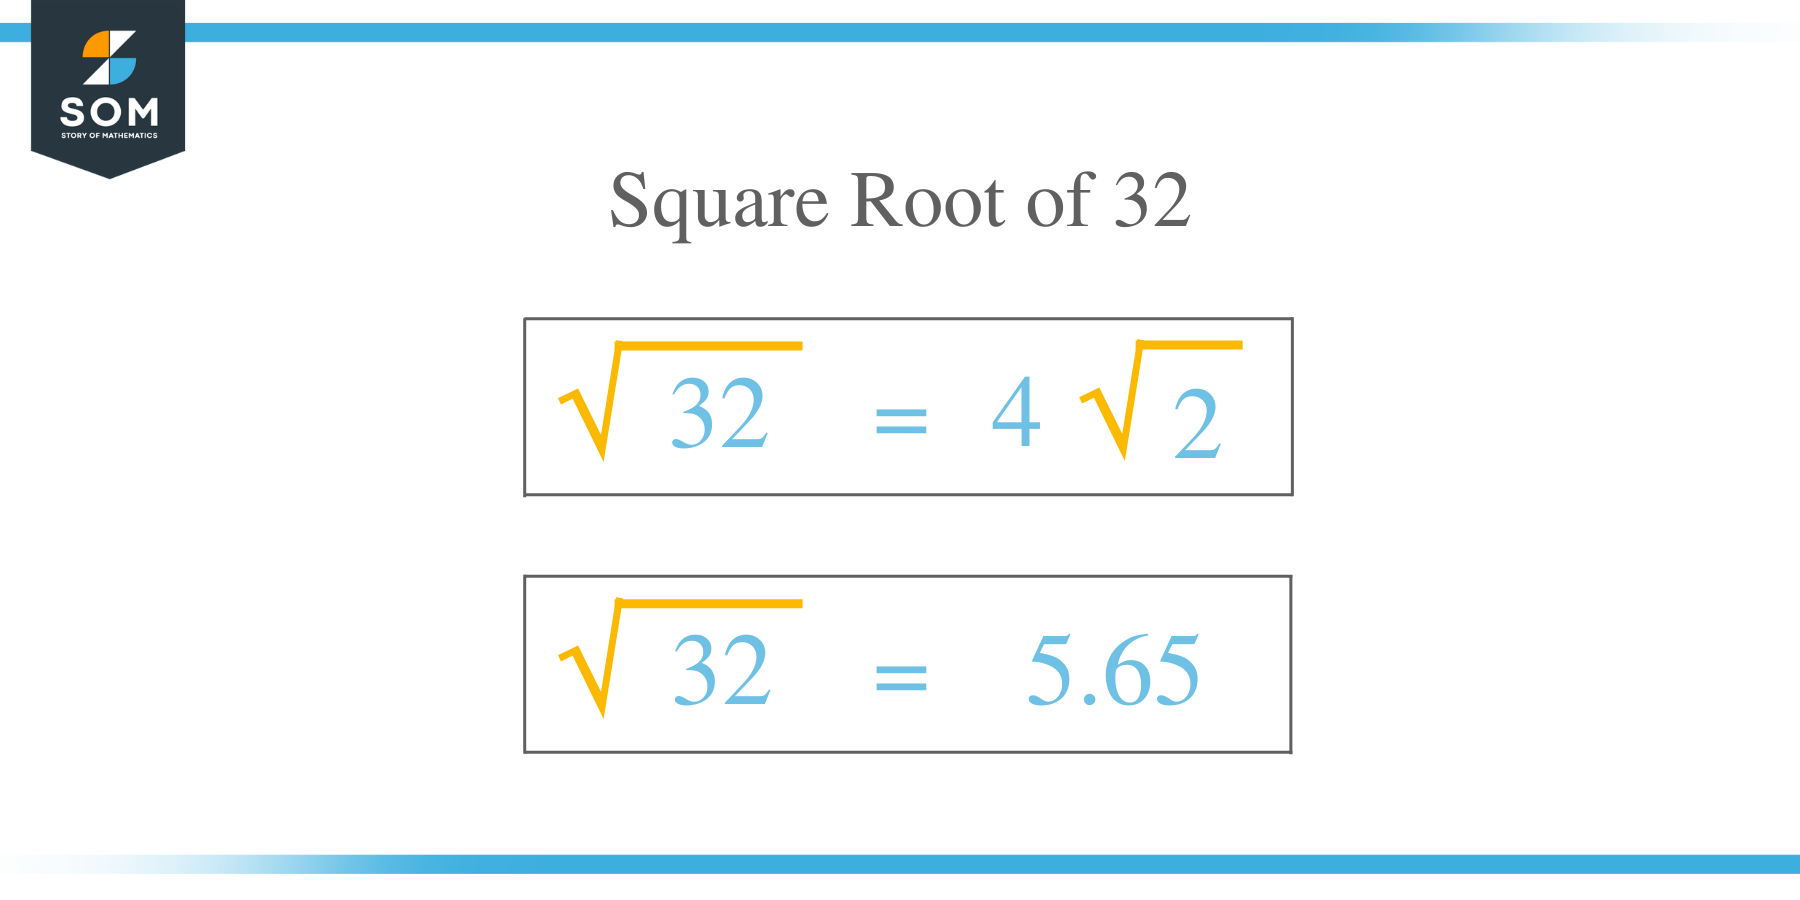 Square Root of 32